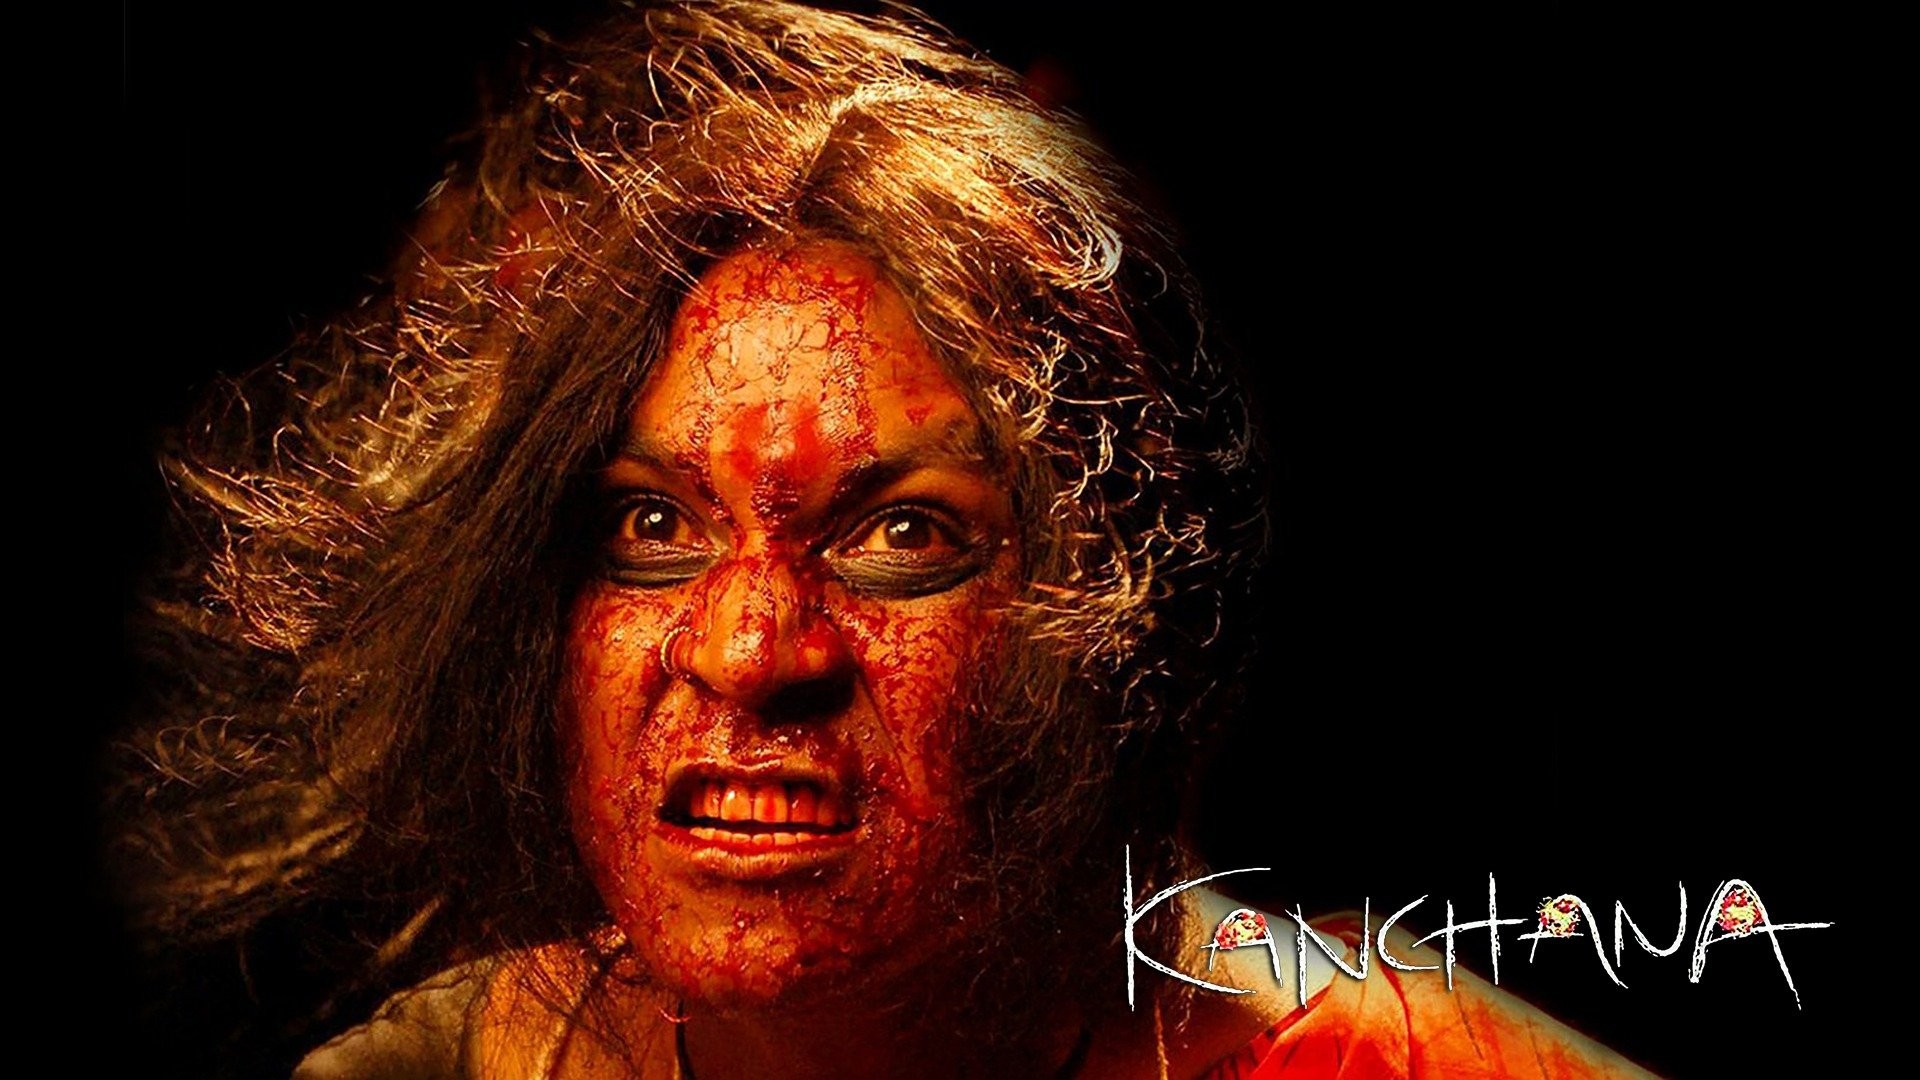 Watch Kanchana 3 Full movie Online In HD | Find where to watch it online on  Justdial